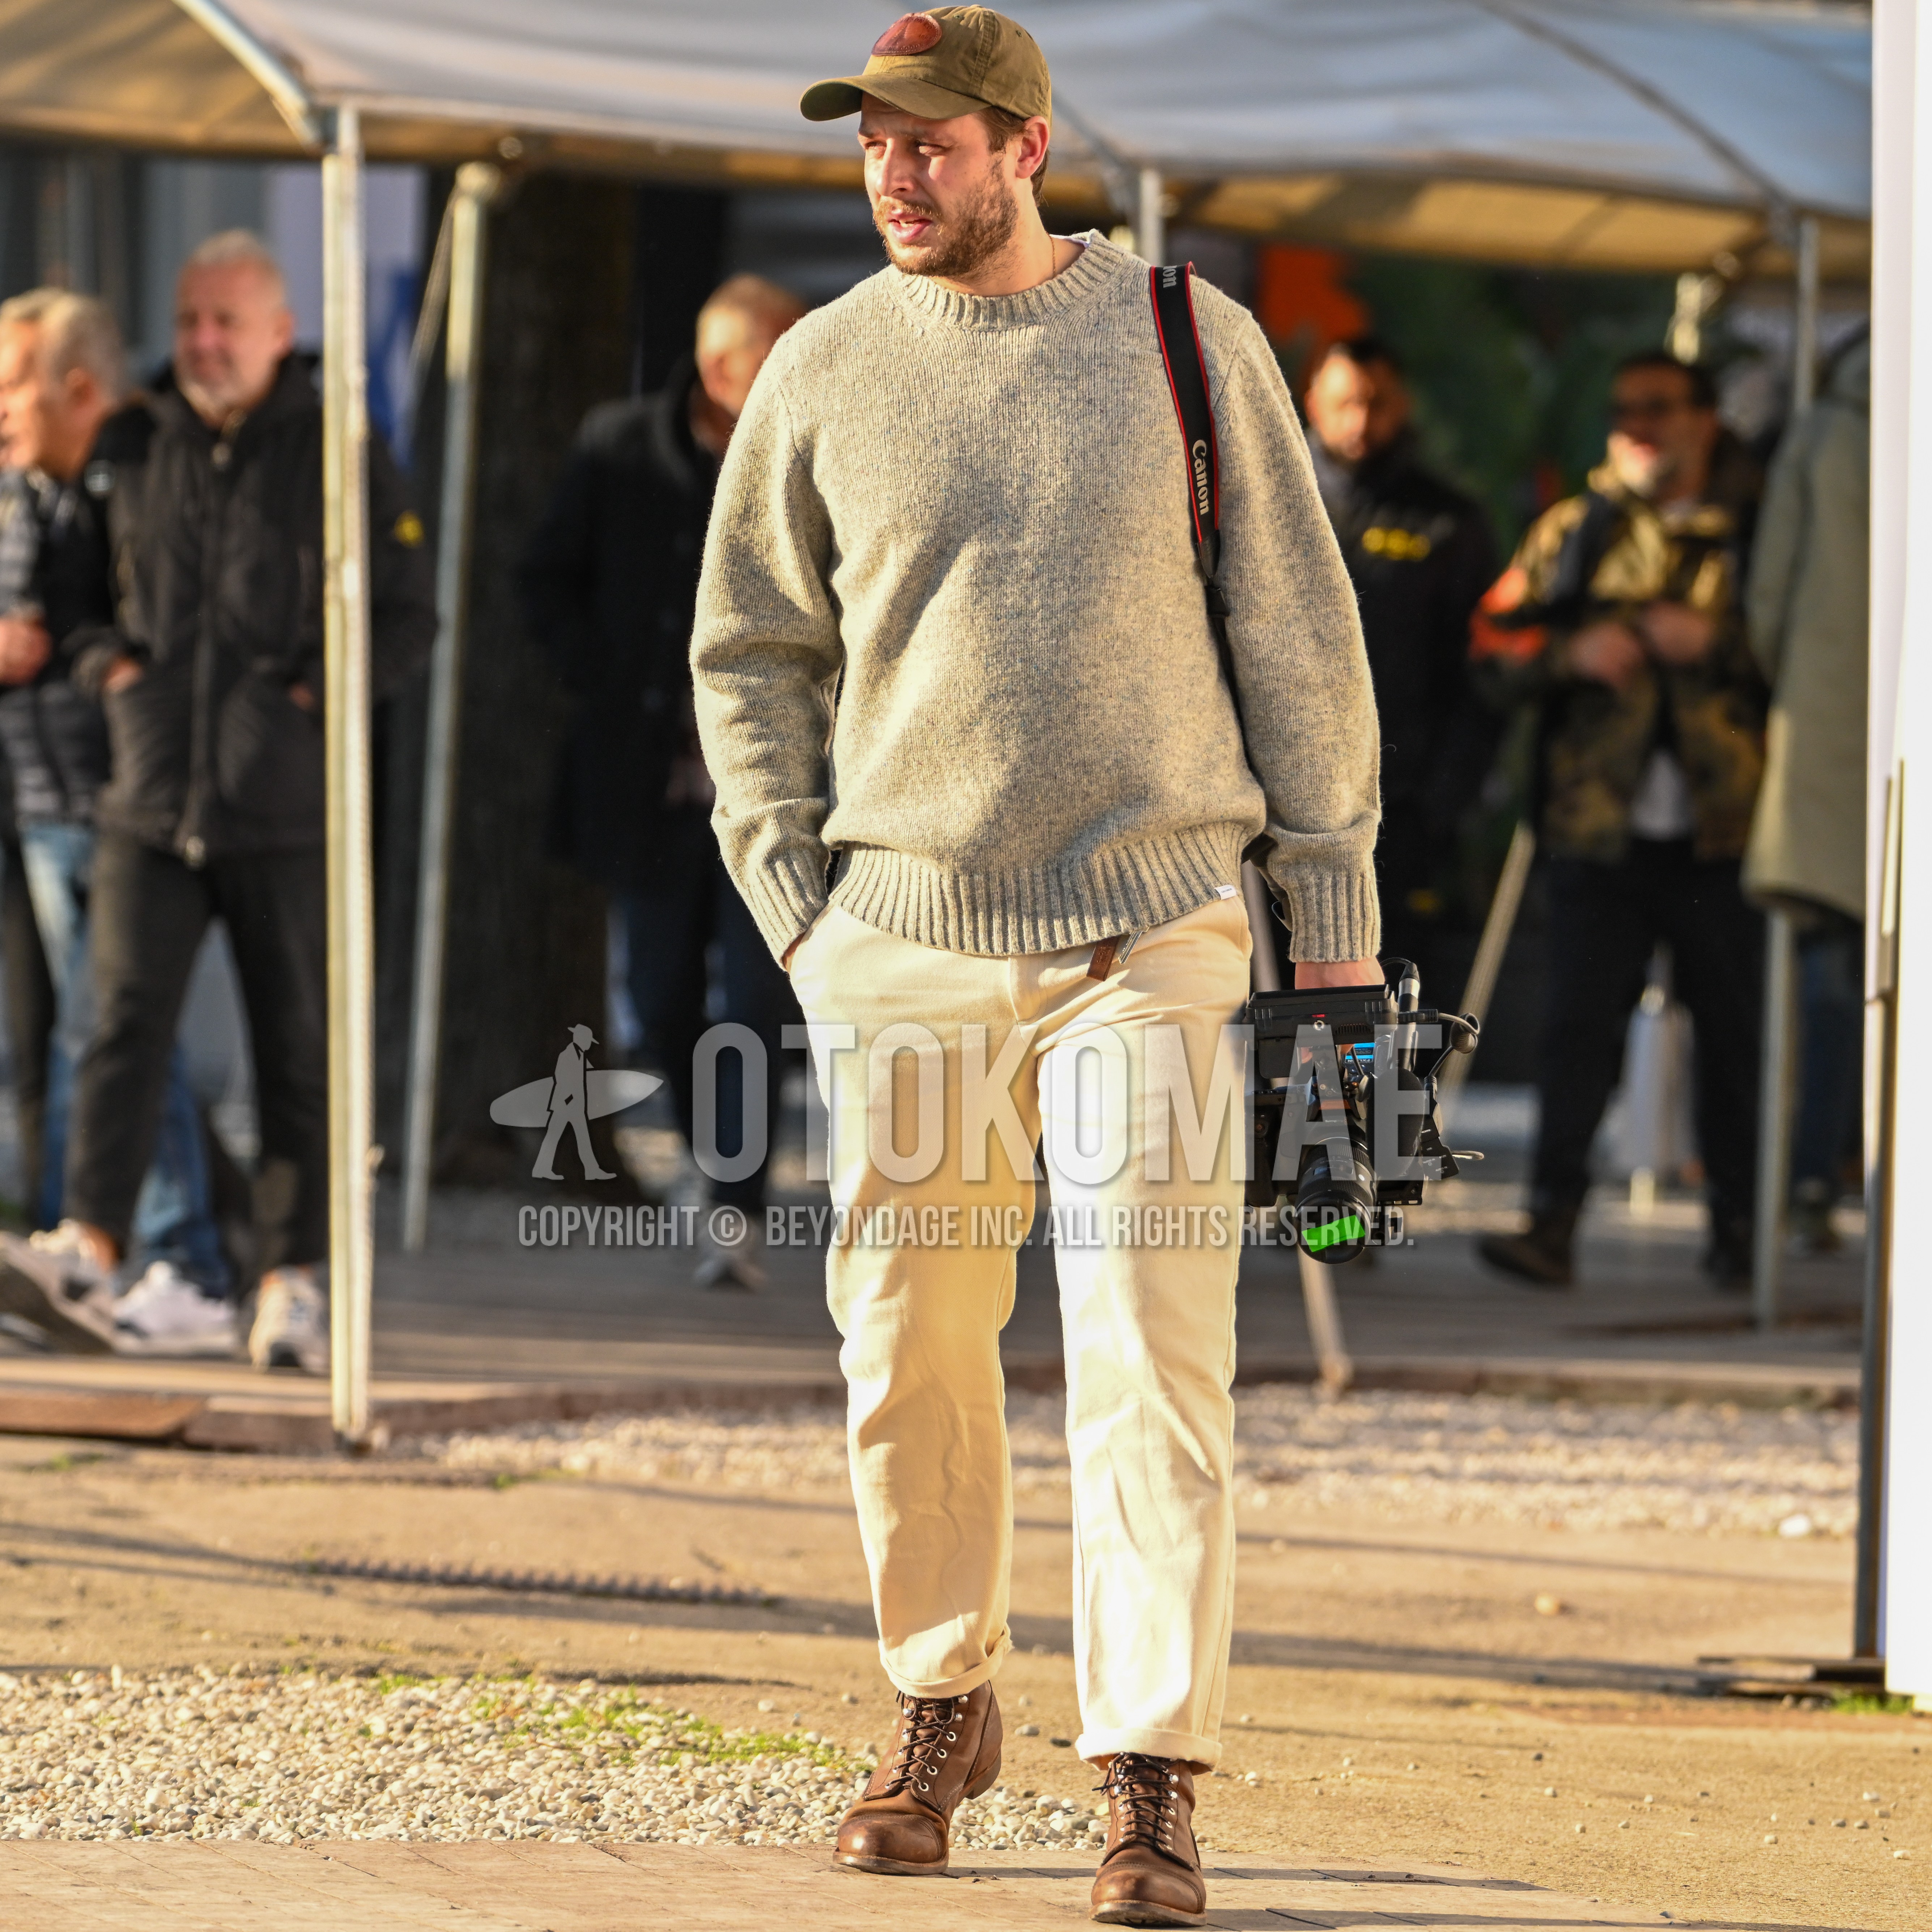 Men's autumn outfit with olive green one point baseball cap, gray plain sweater, white plain winter pants (corduroy,velour), brown work boots.